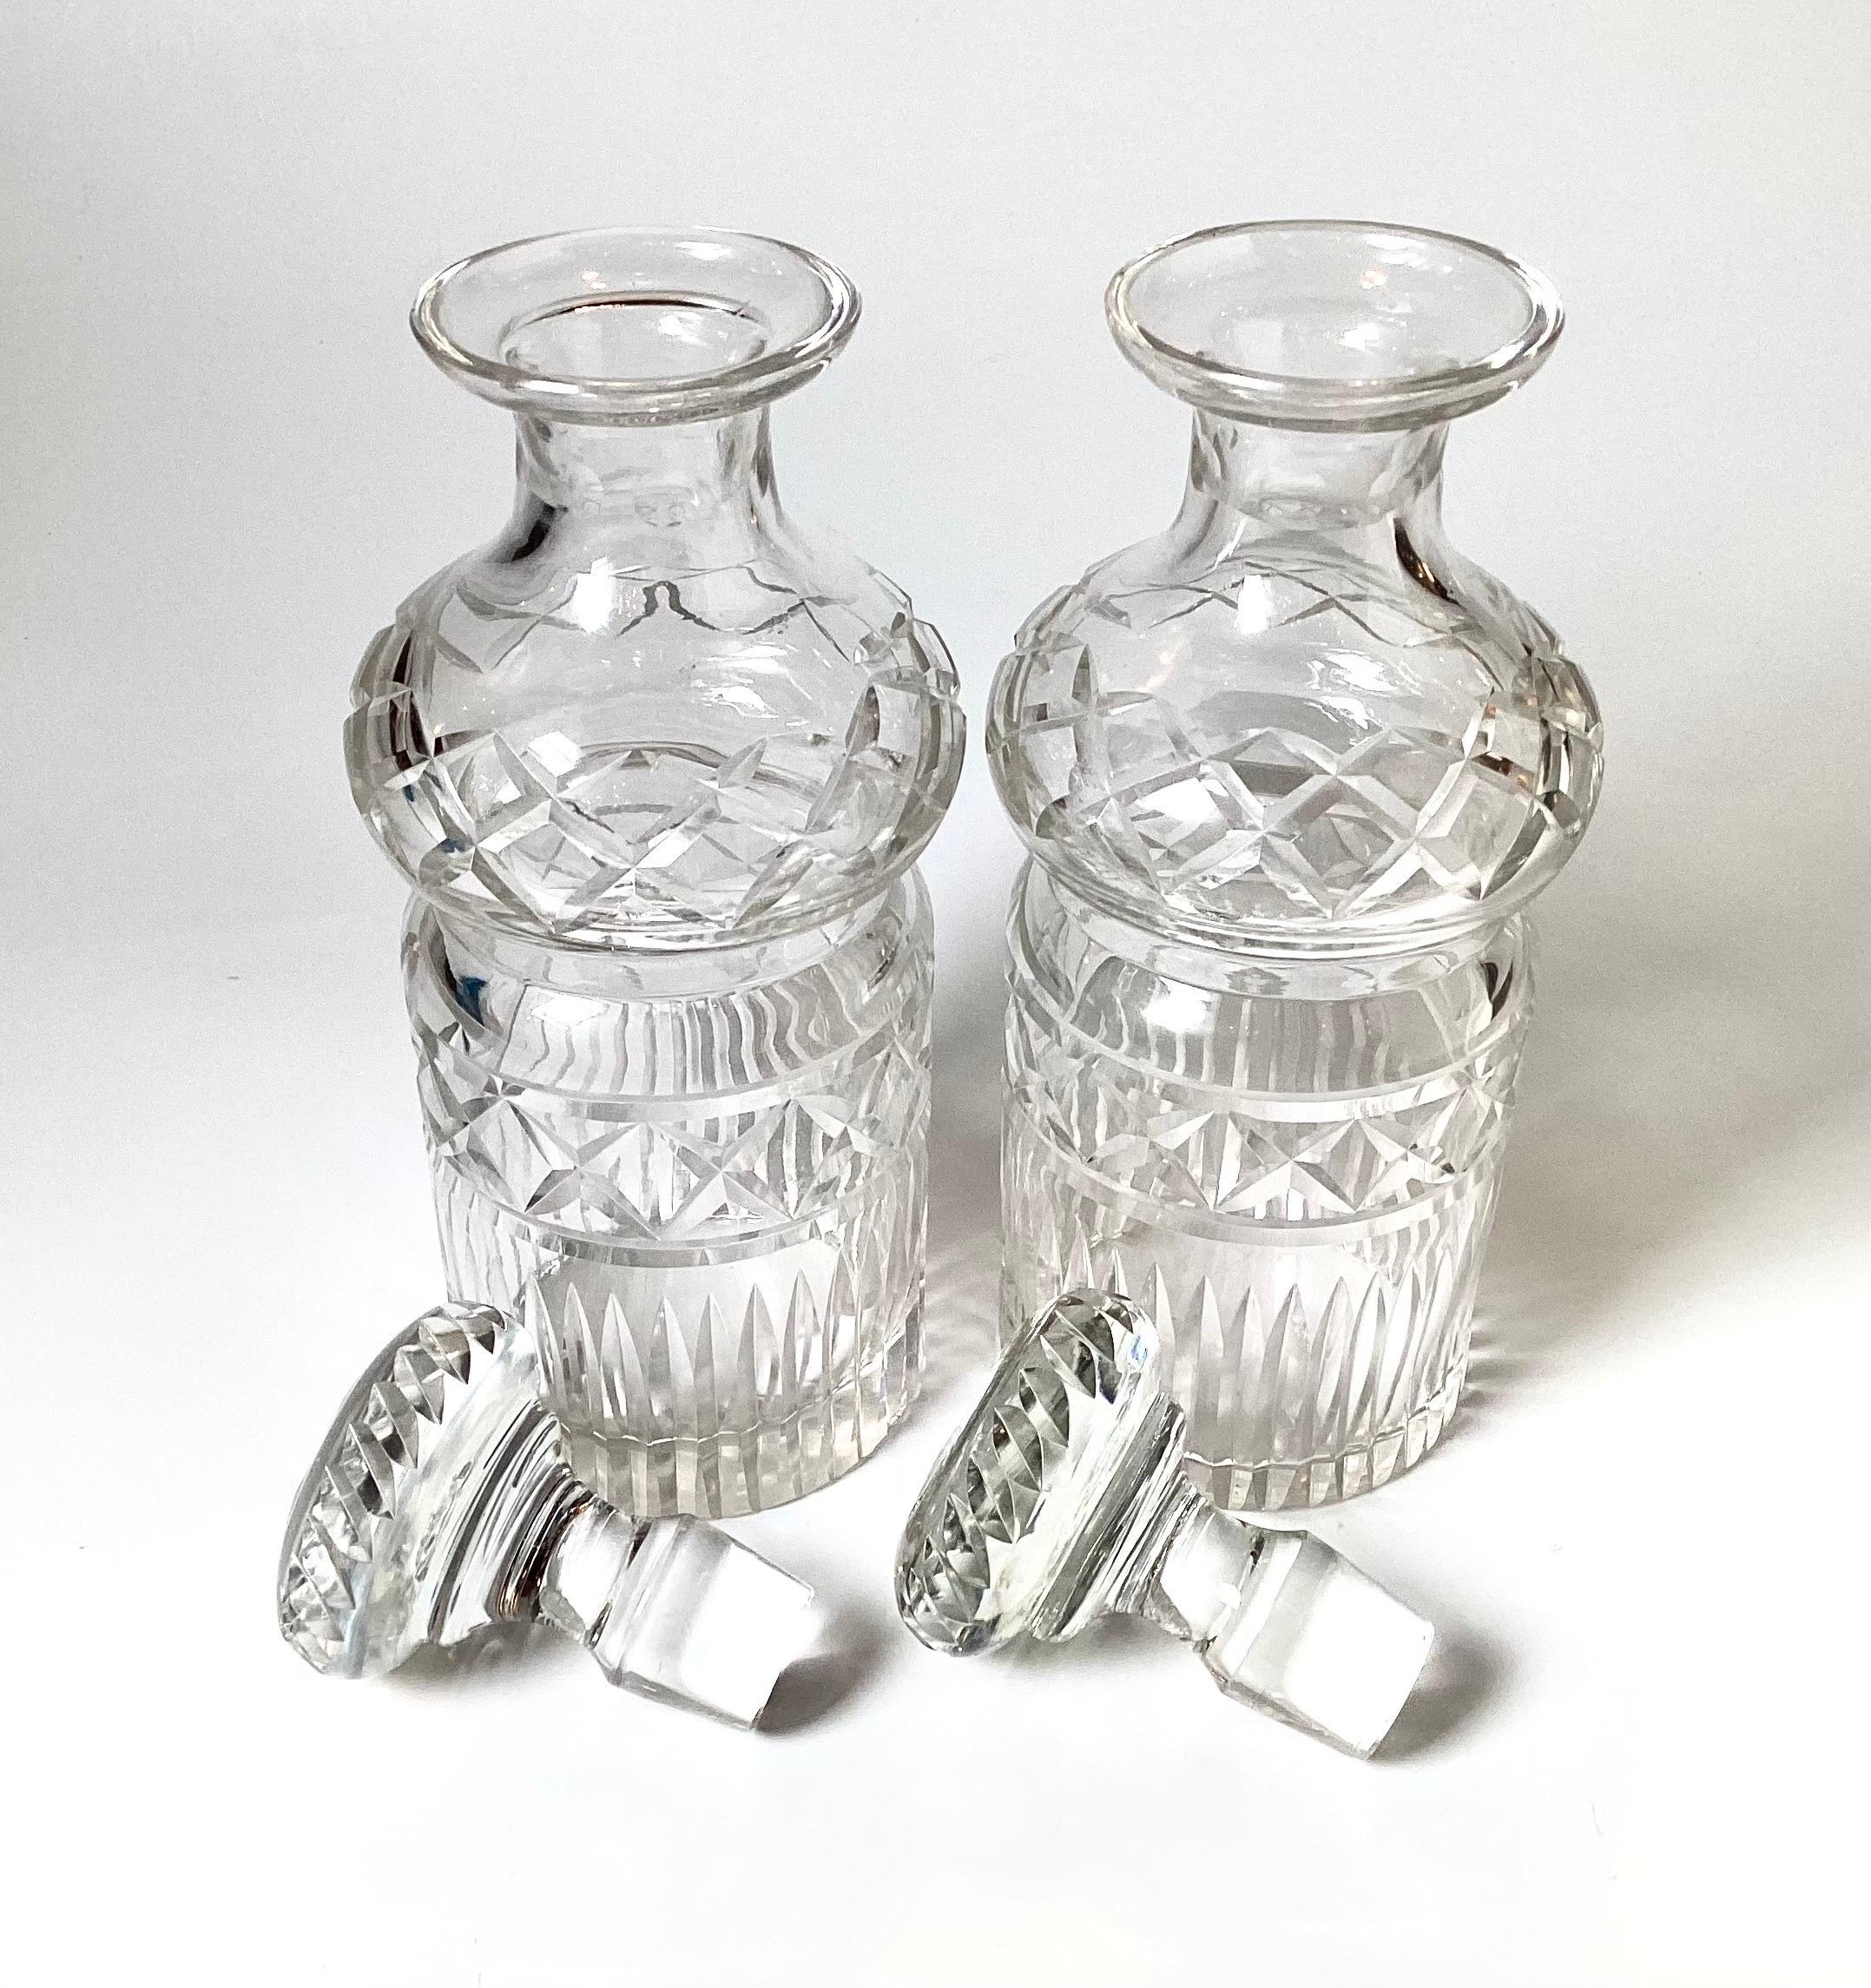 A Pair of European Cut glass spirit decanters with original stoppers. The round bottles with mushroom uppers with diamond pattern along with vertical cuts at the bottoms. Measures: 11 high, 4.5 inches in dimaeter.